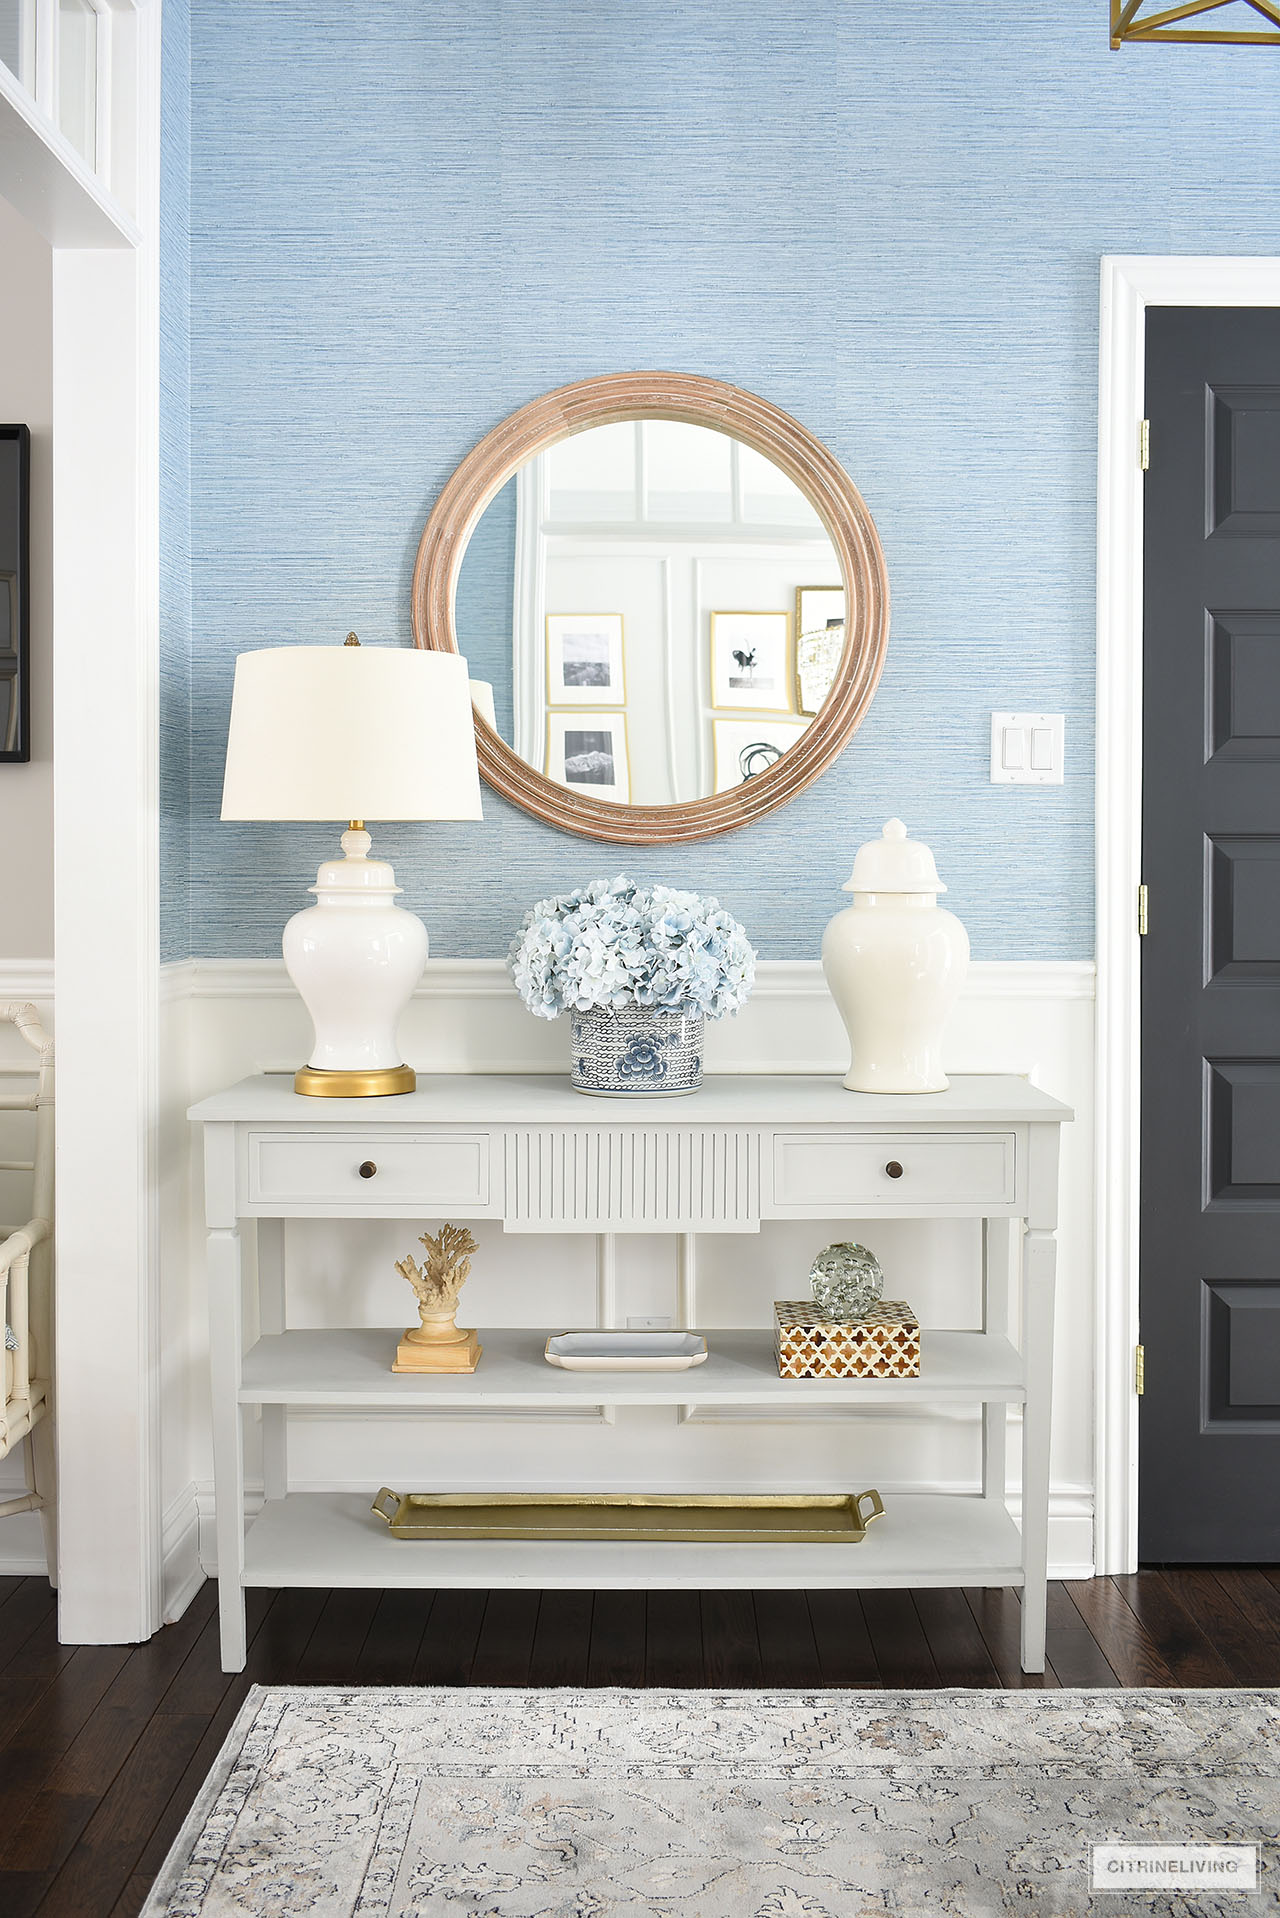 Entryway console table styled for spring with white ginger jars and ginger jar lamp, light blue hydrangeas and neutral accessories.